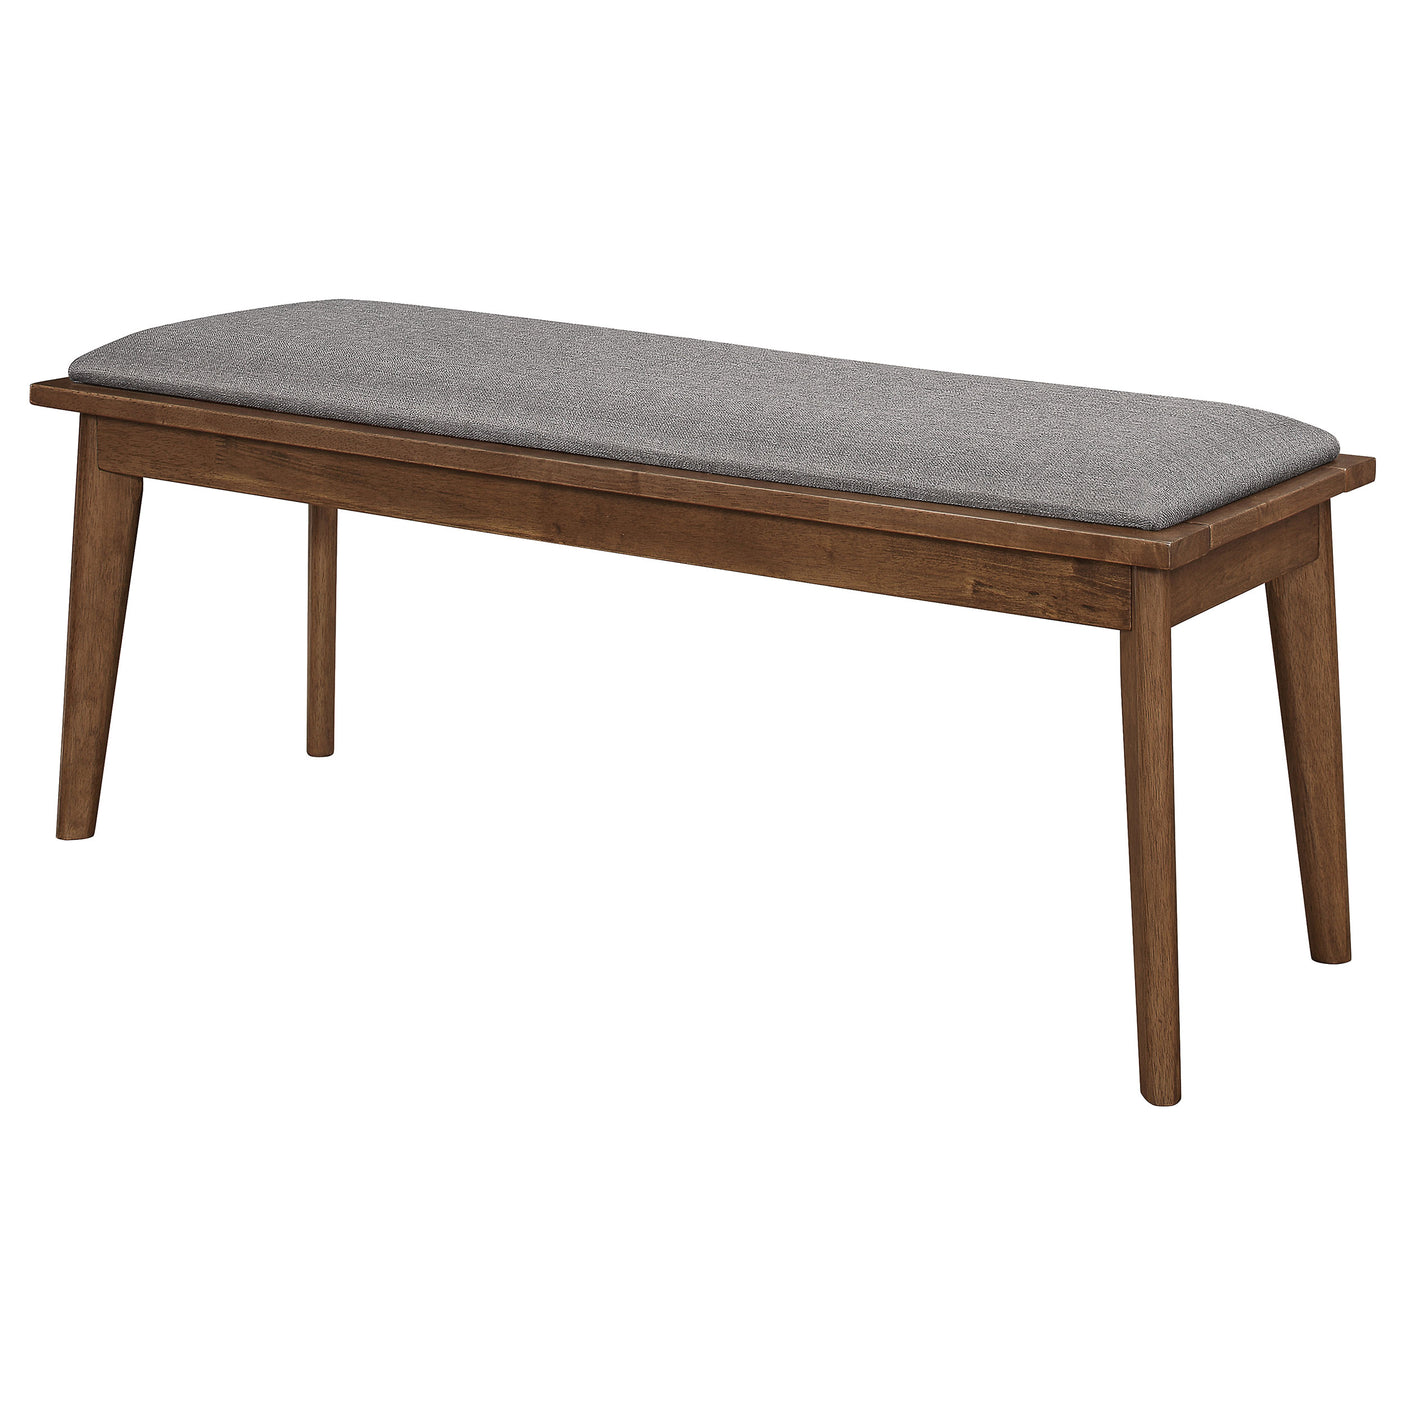 Bench - Alfredo Upholstered Dining Bench Grey and Natural Walnut